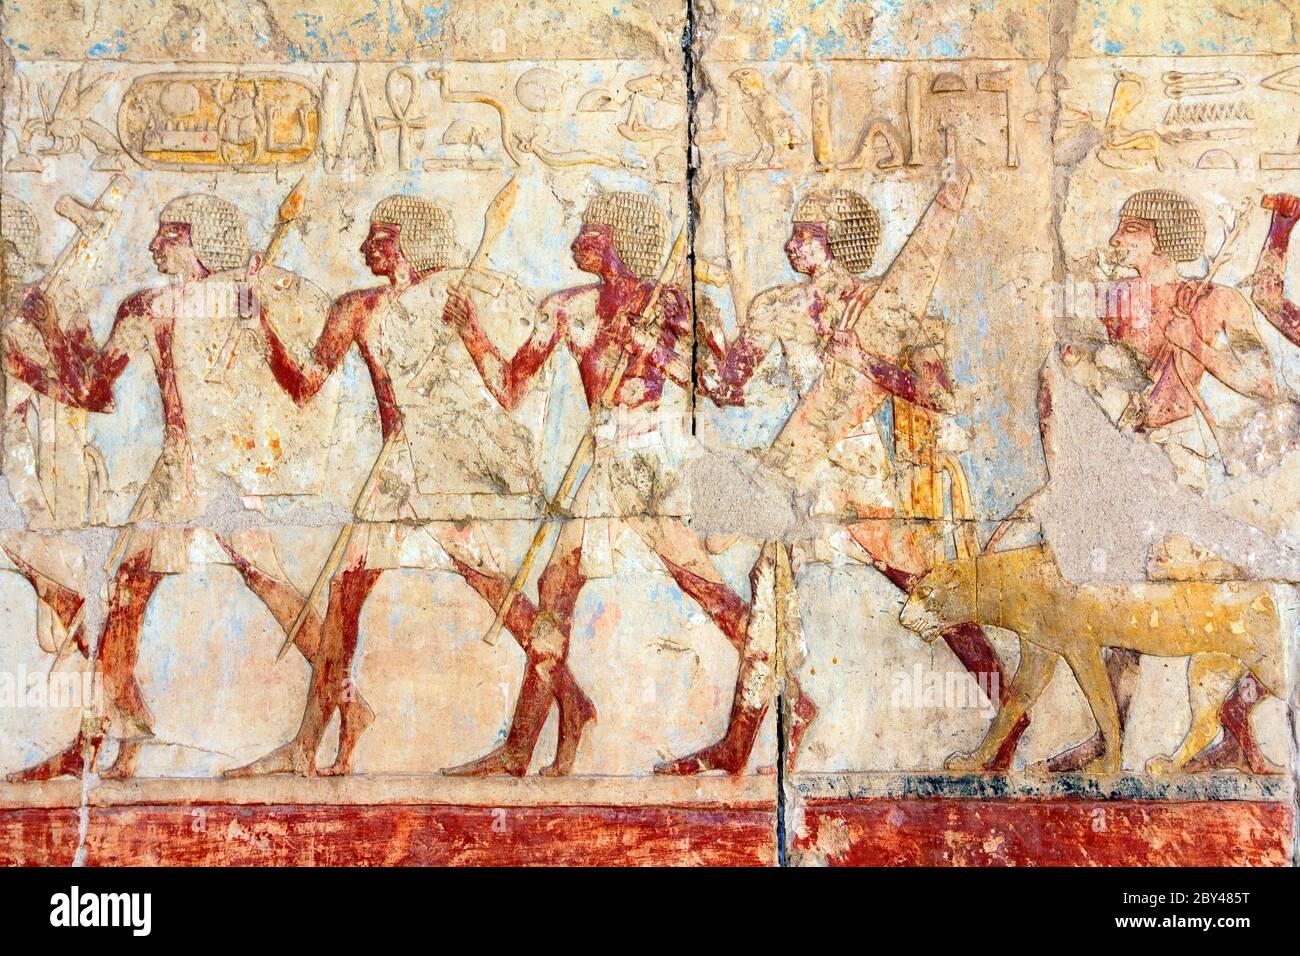 ancient egypt images and hieroglyphics Stock Photo